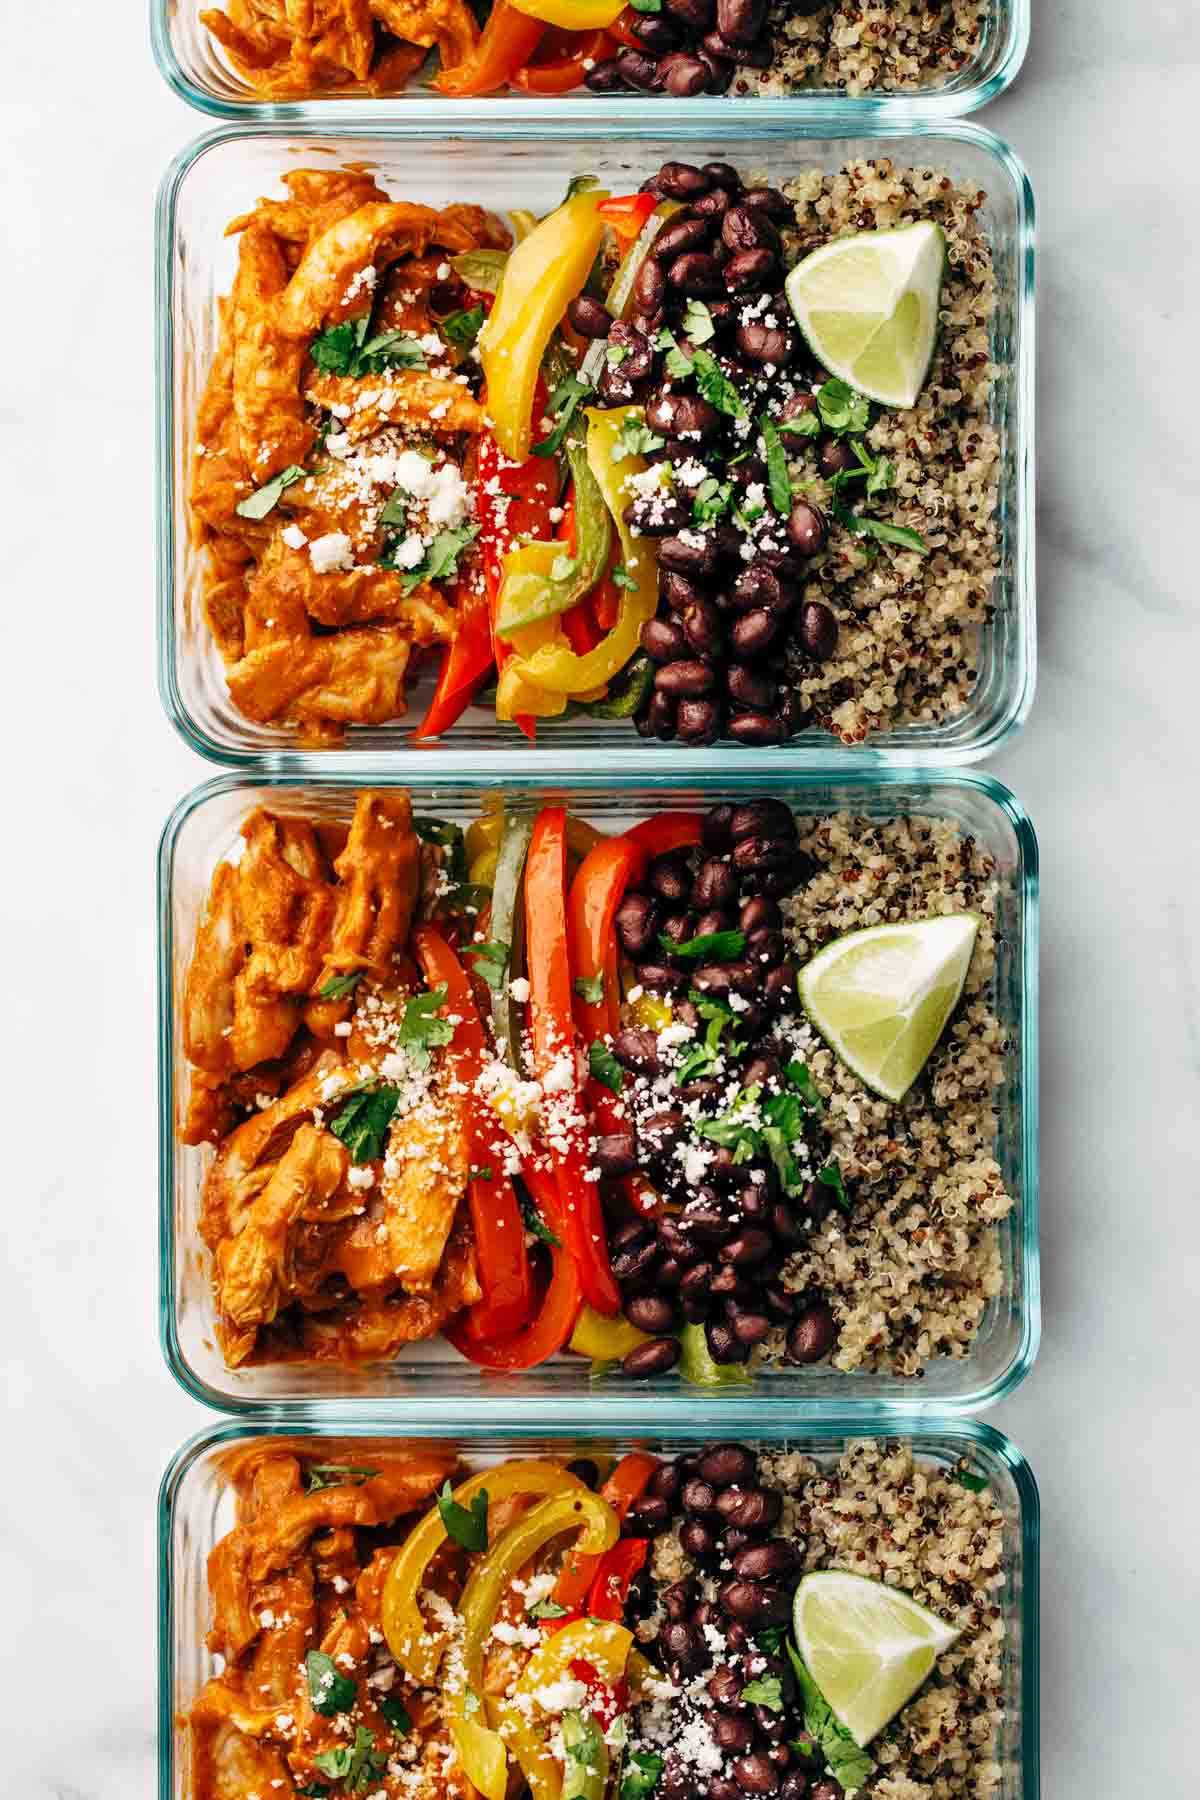 Chicken, peppers, beans, and quinoa in glass meal prep containers.